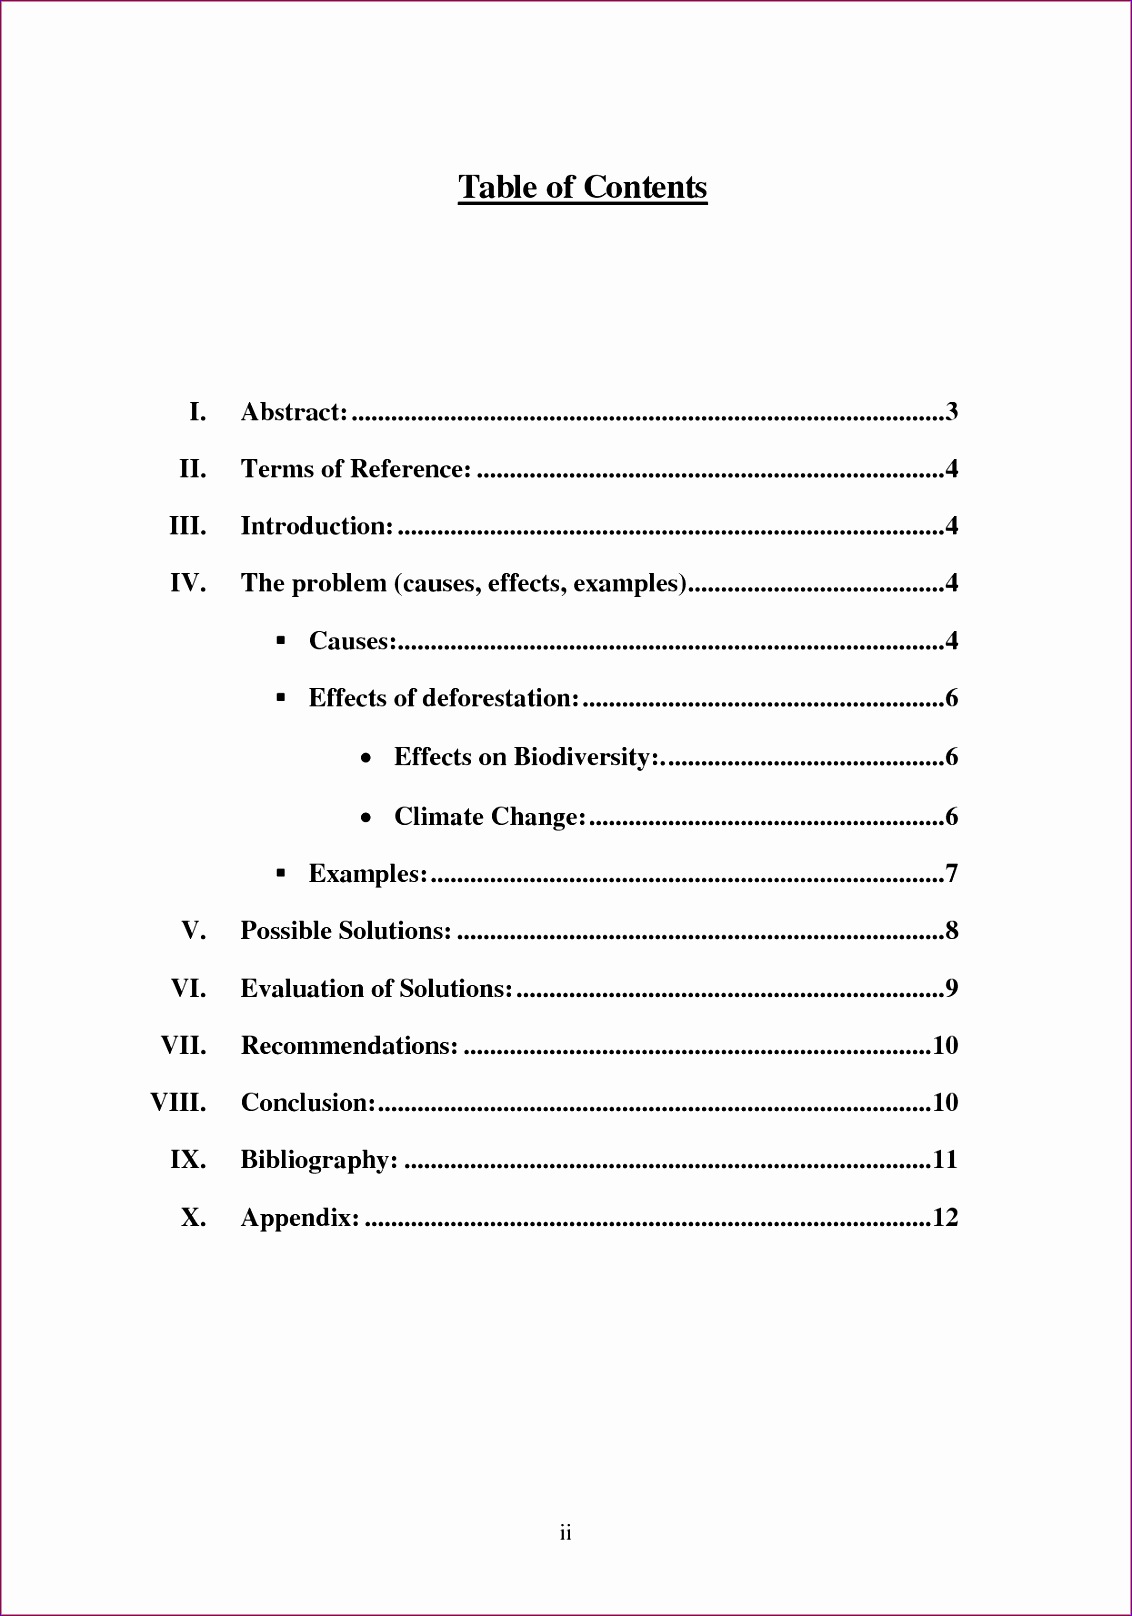 4 table of contents sample 11321616